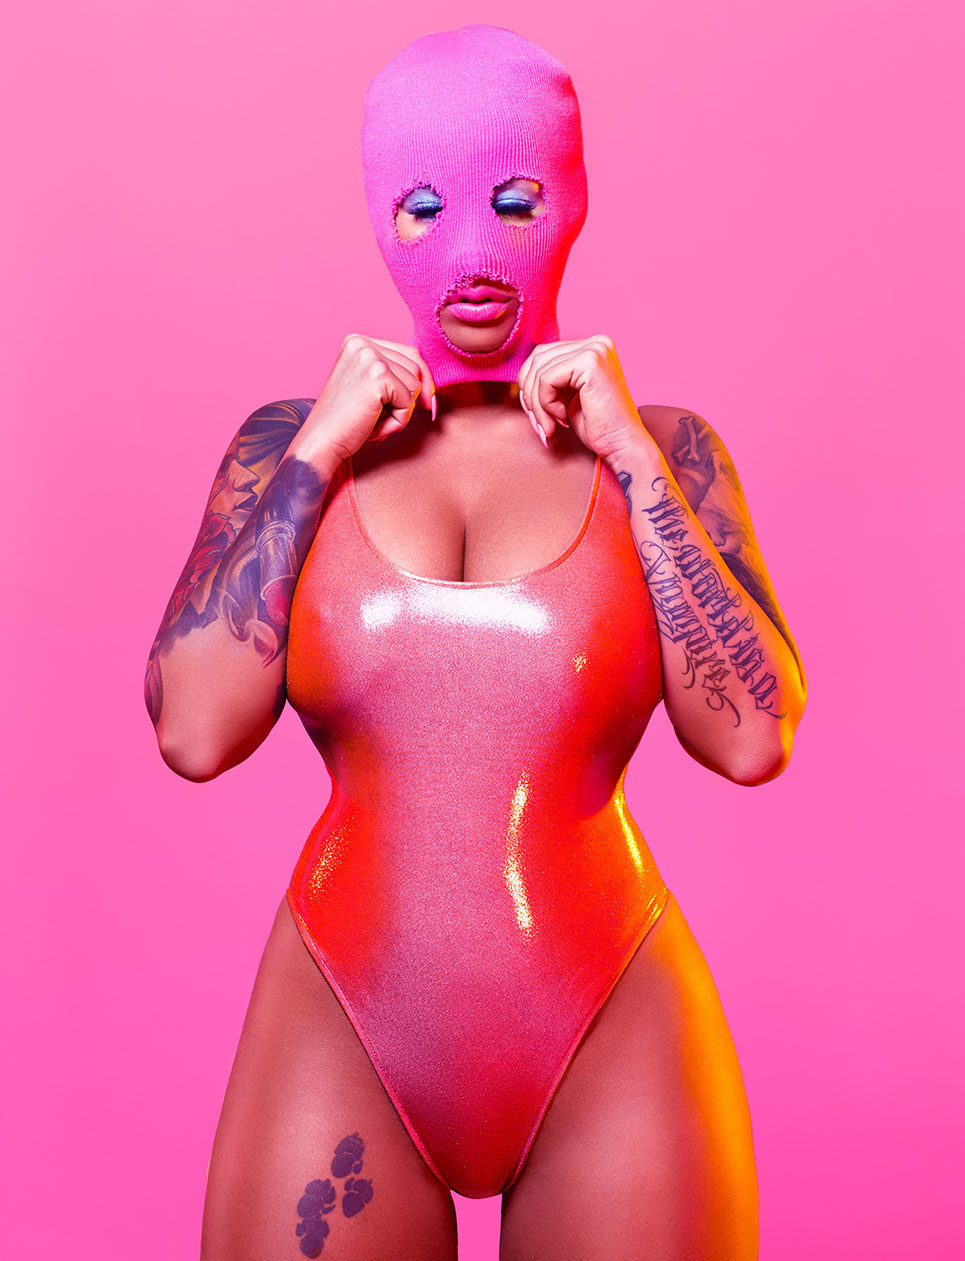 Amber Rose as Pussy Riot.